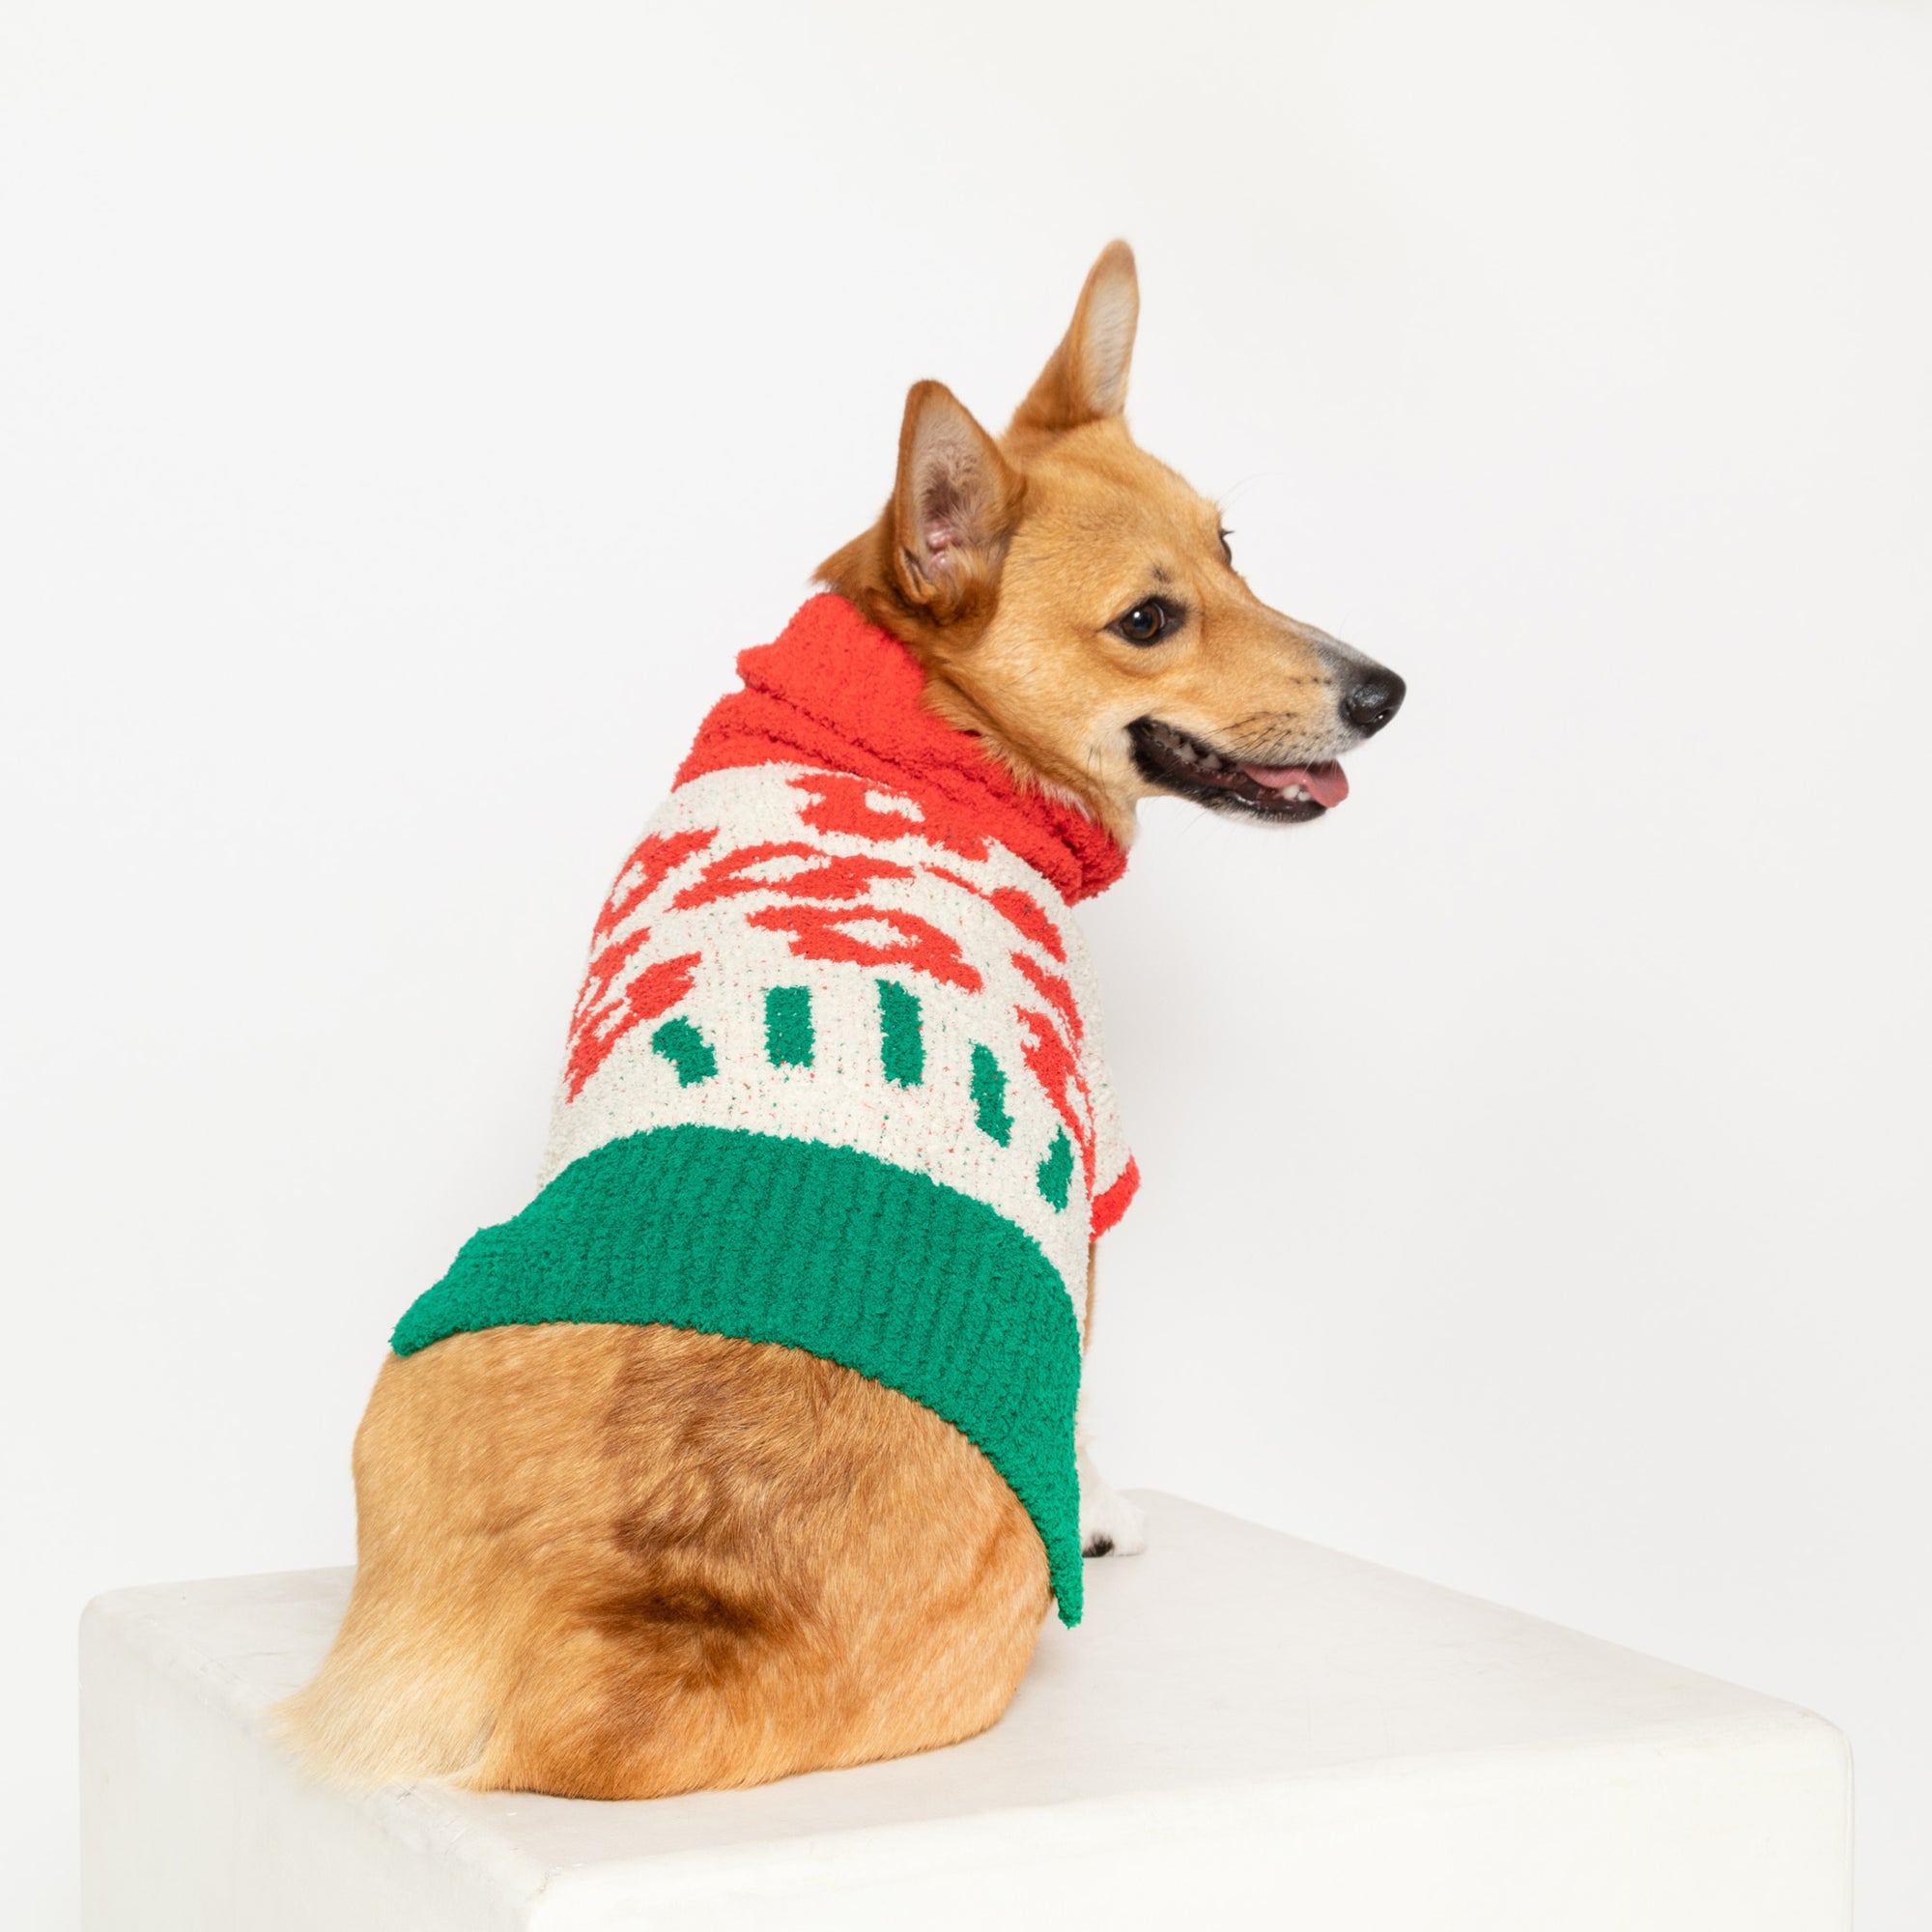 Corgi in a red and green "The Furryfolks" flower sweater, seated on a cube, white background.